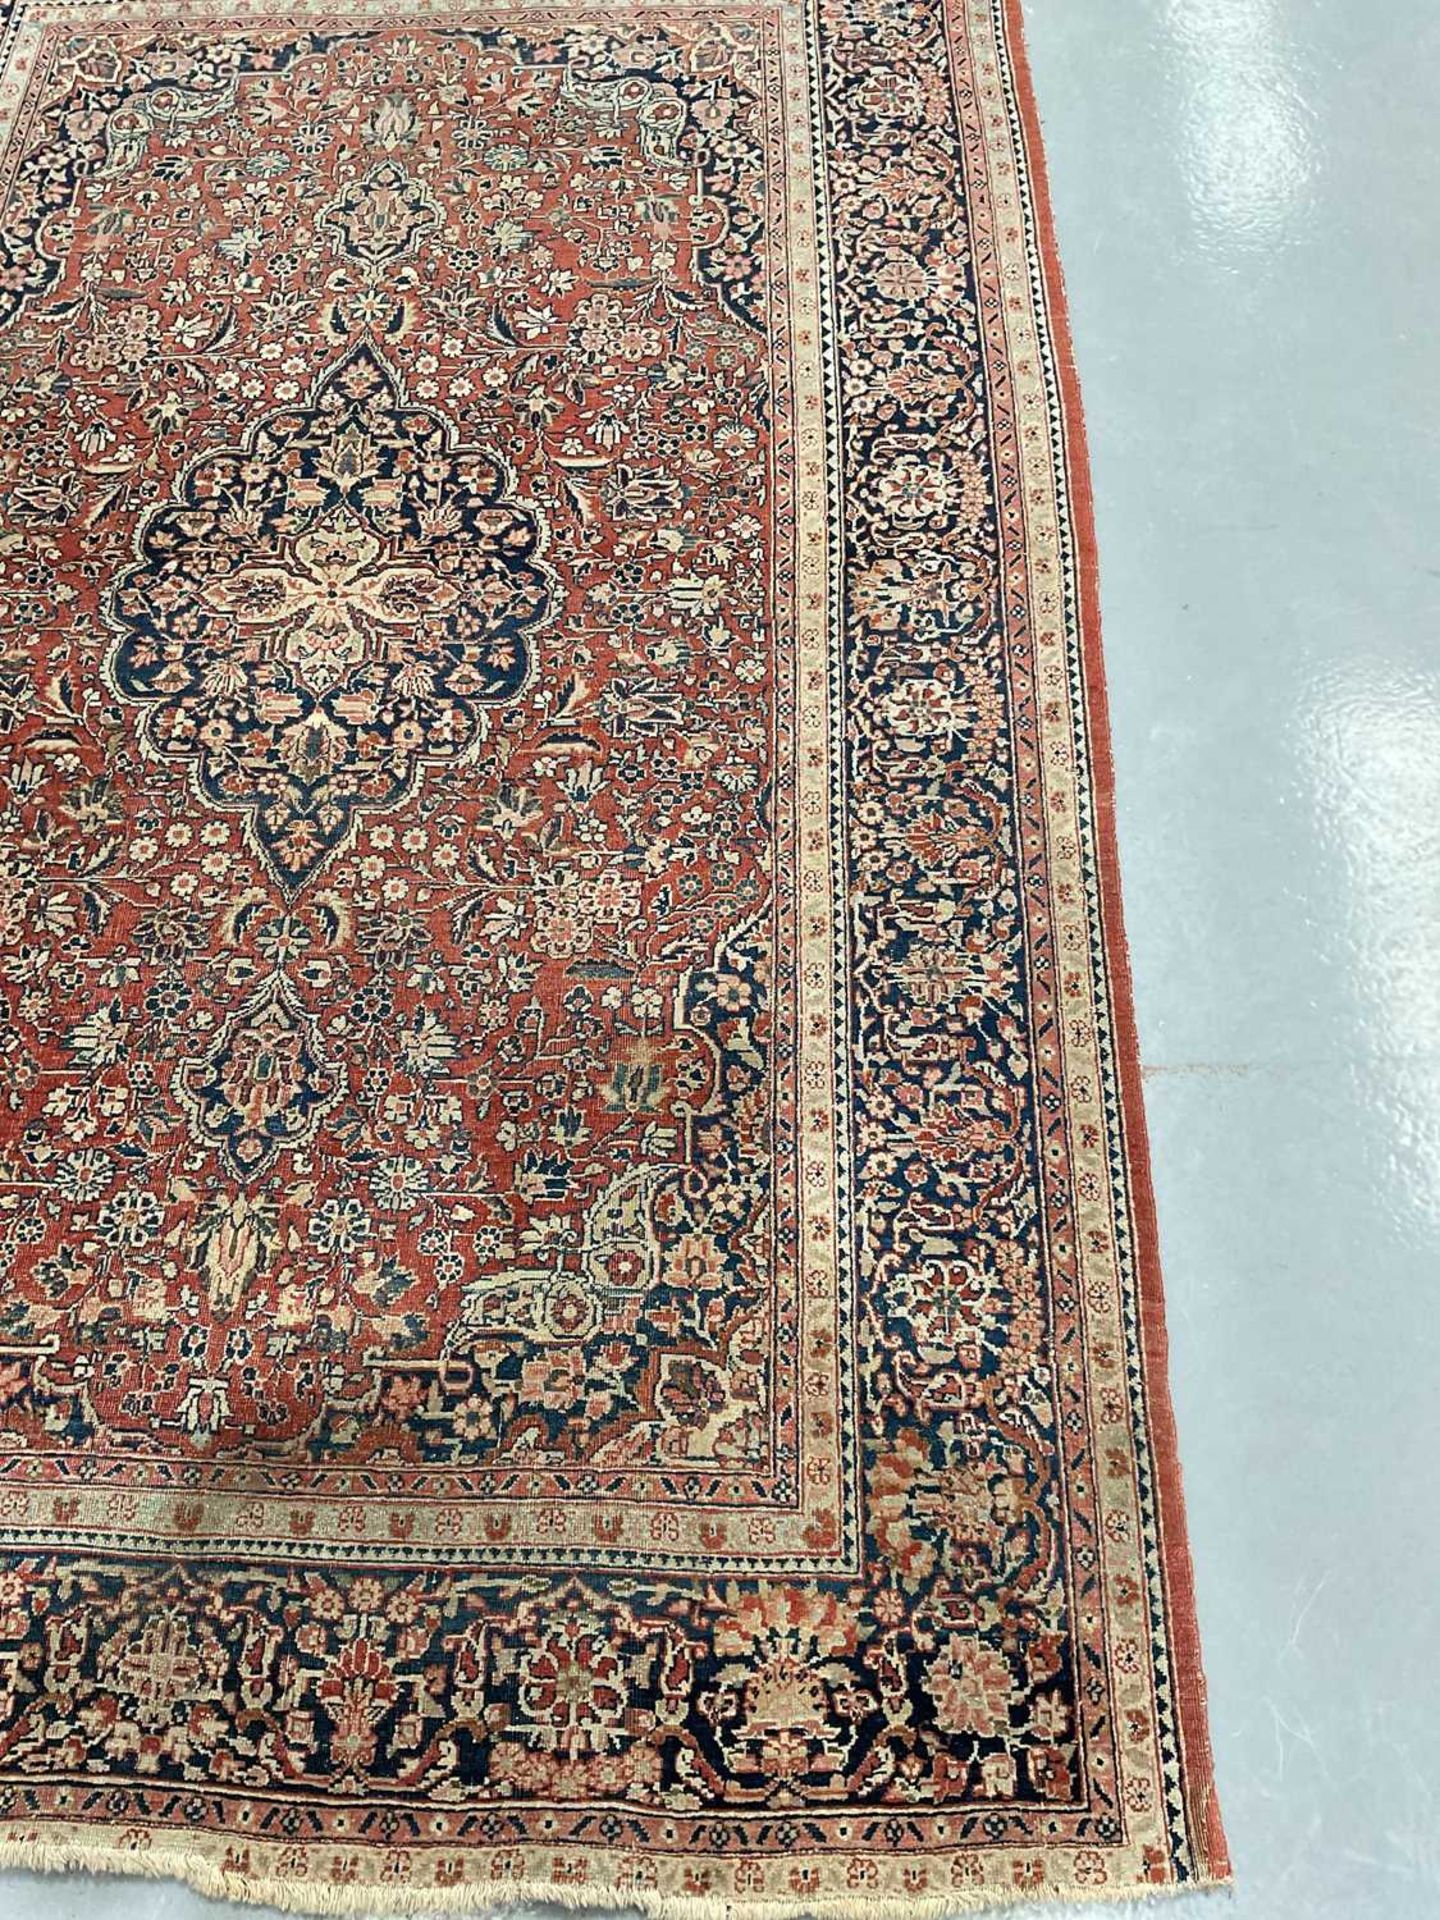 A Kashan rug with central medalion within borders, 202 x 133cm (2) Provenance: The contents of The - Image 4 of 9